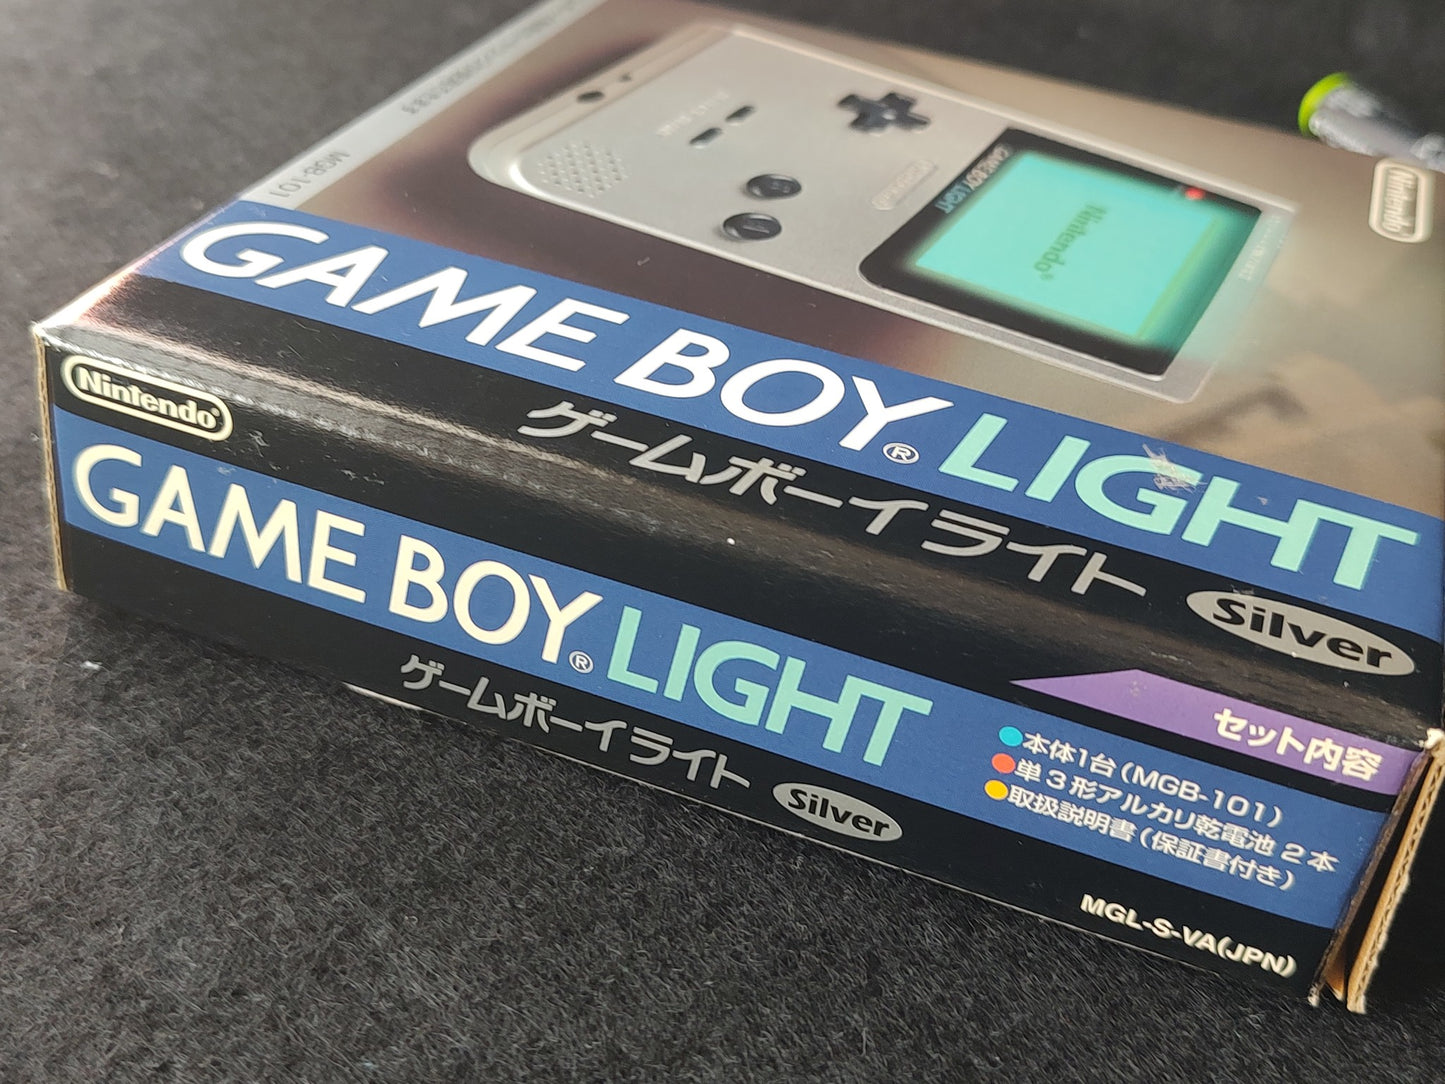 Nintendo Game boy Light Silver color console MGB-101, Manual, Boxed set-g0308-